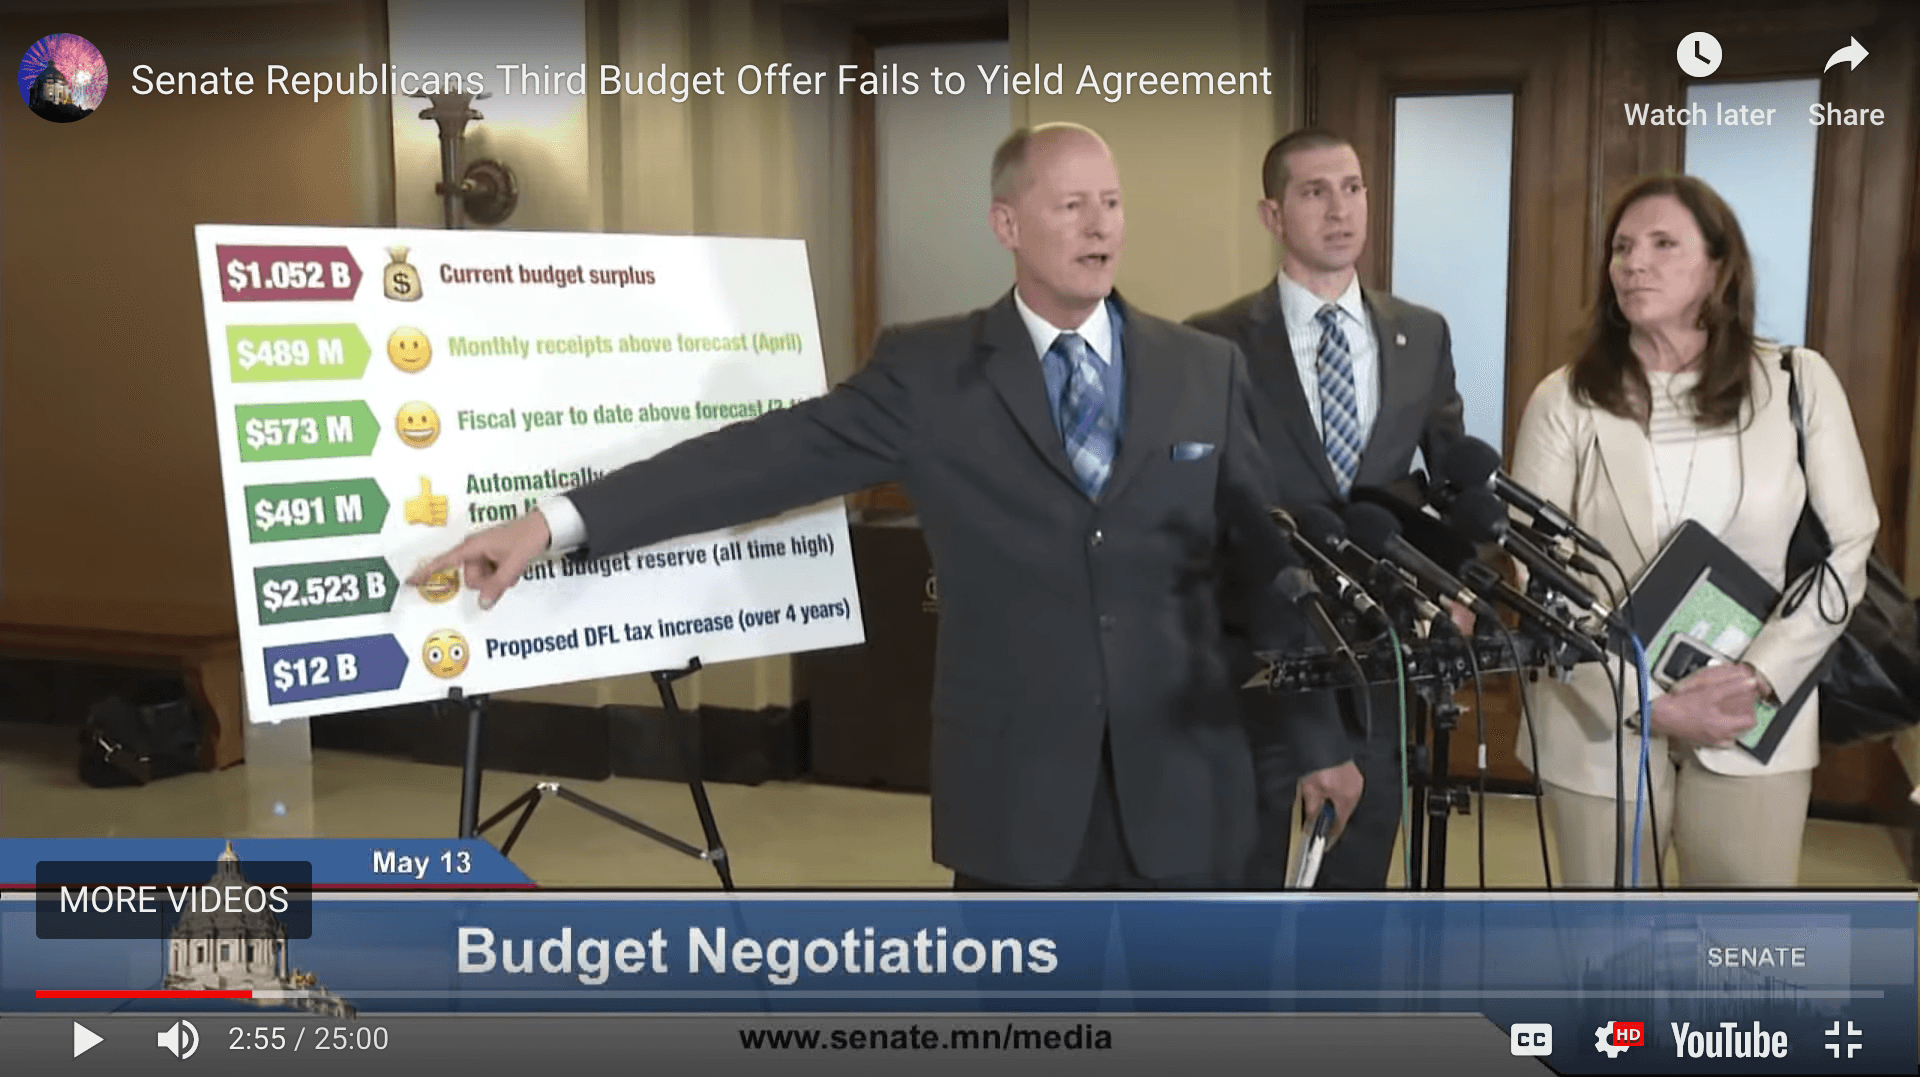 Screenshot from Senate Media video showing senators with budget on poster board, illustrated with emojis.